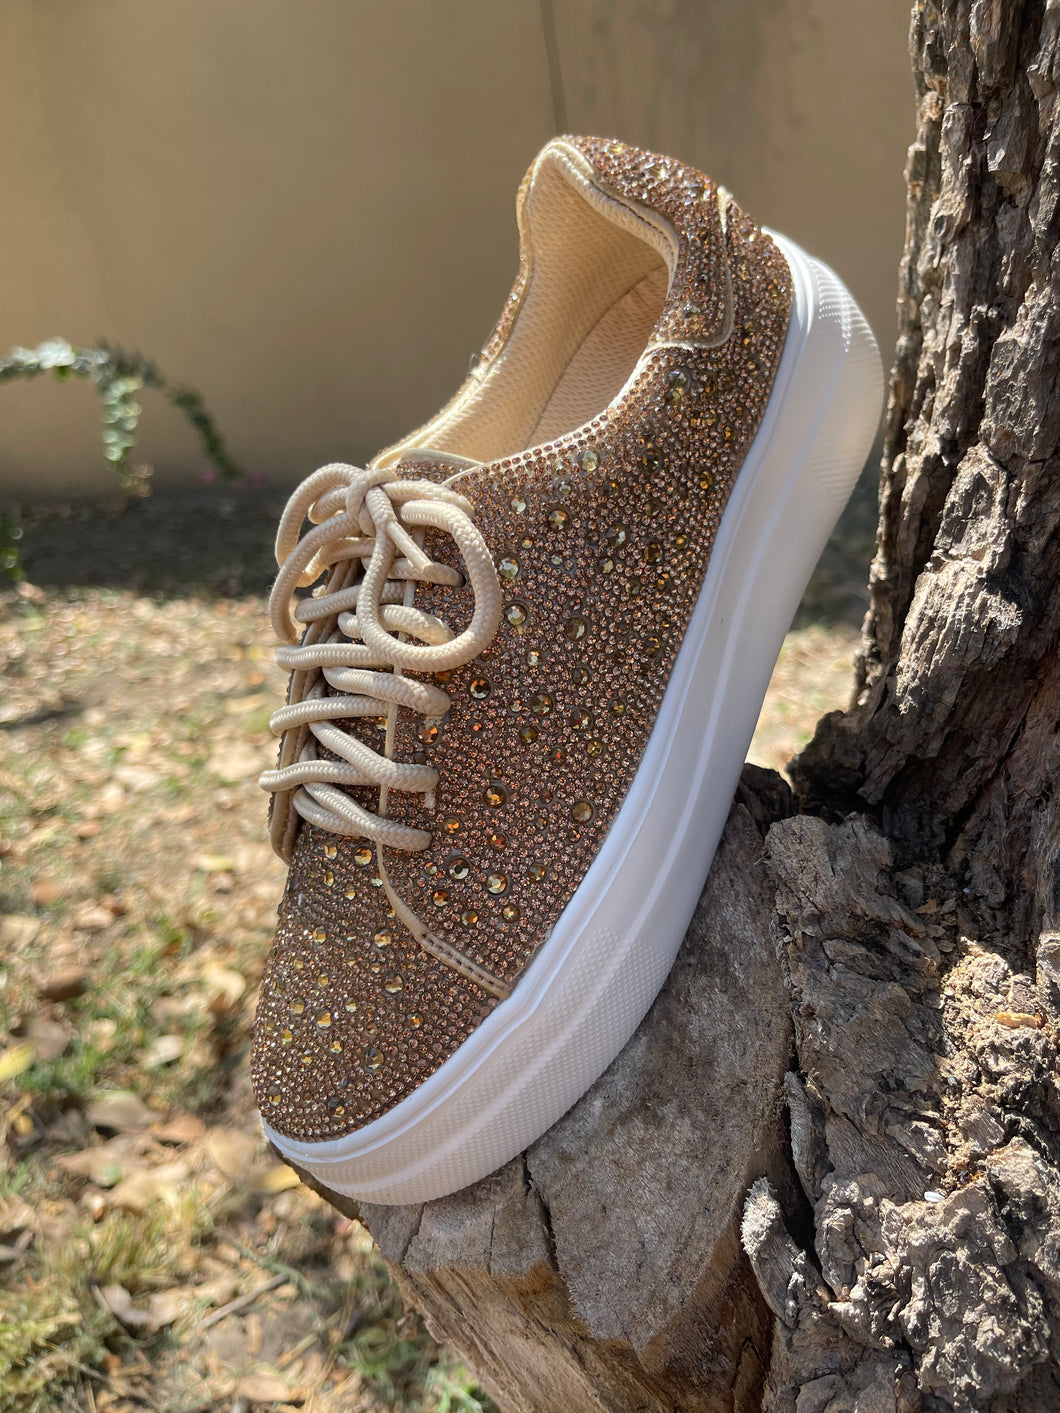 Gold Bedazzled Tennis Shoes